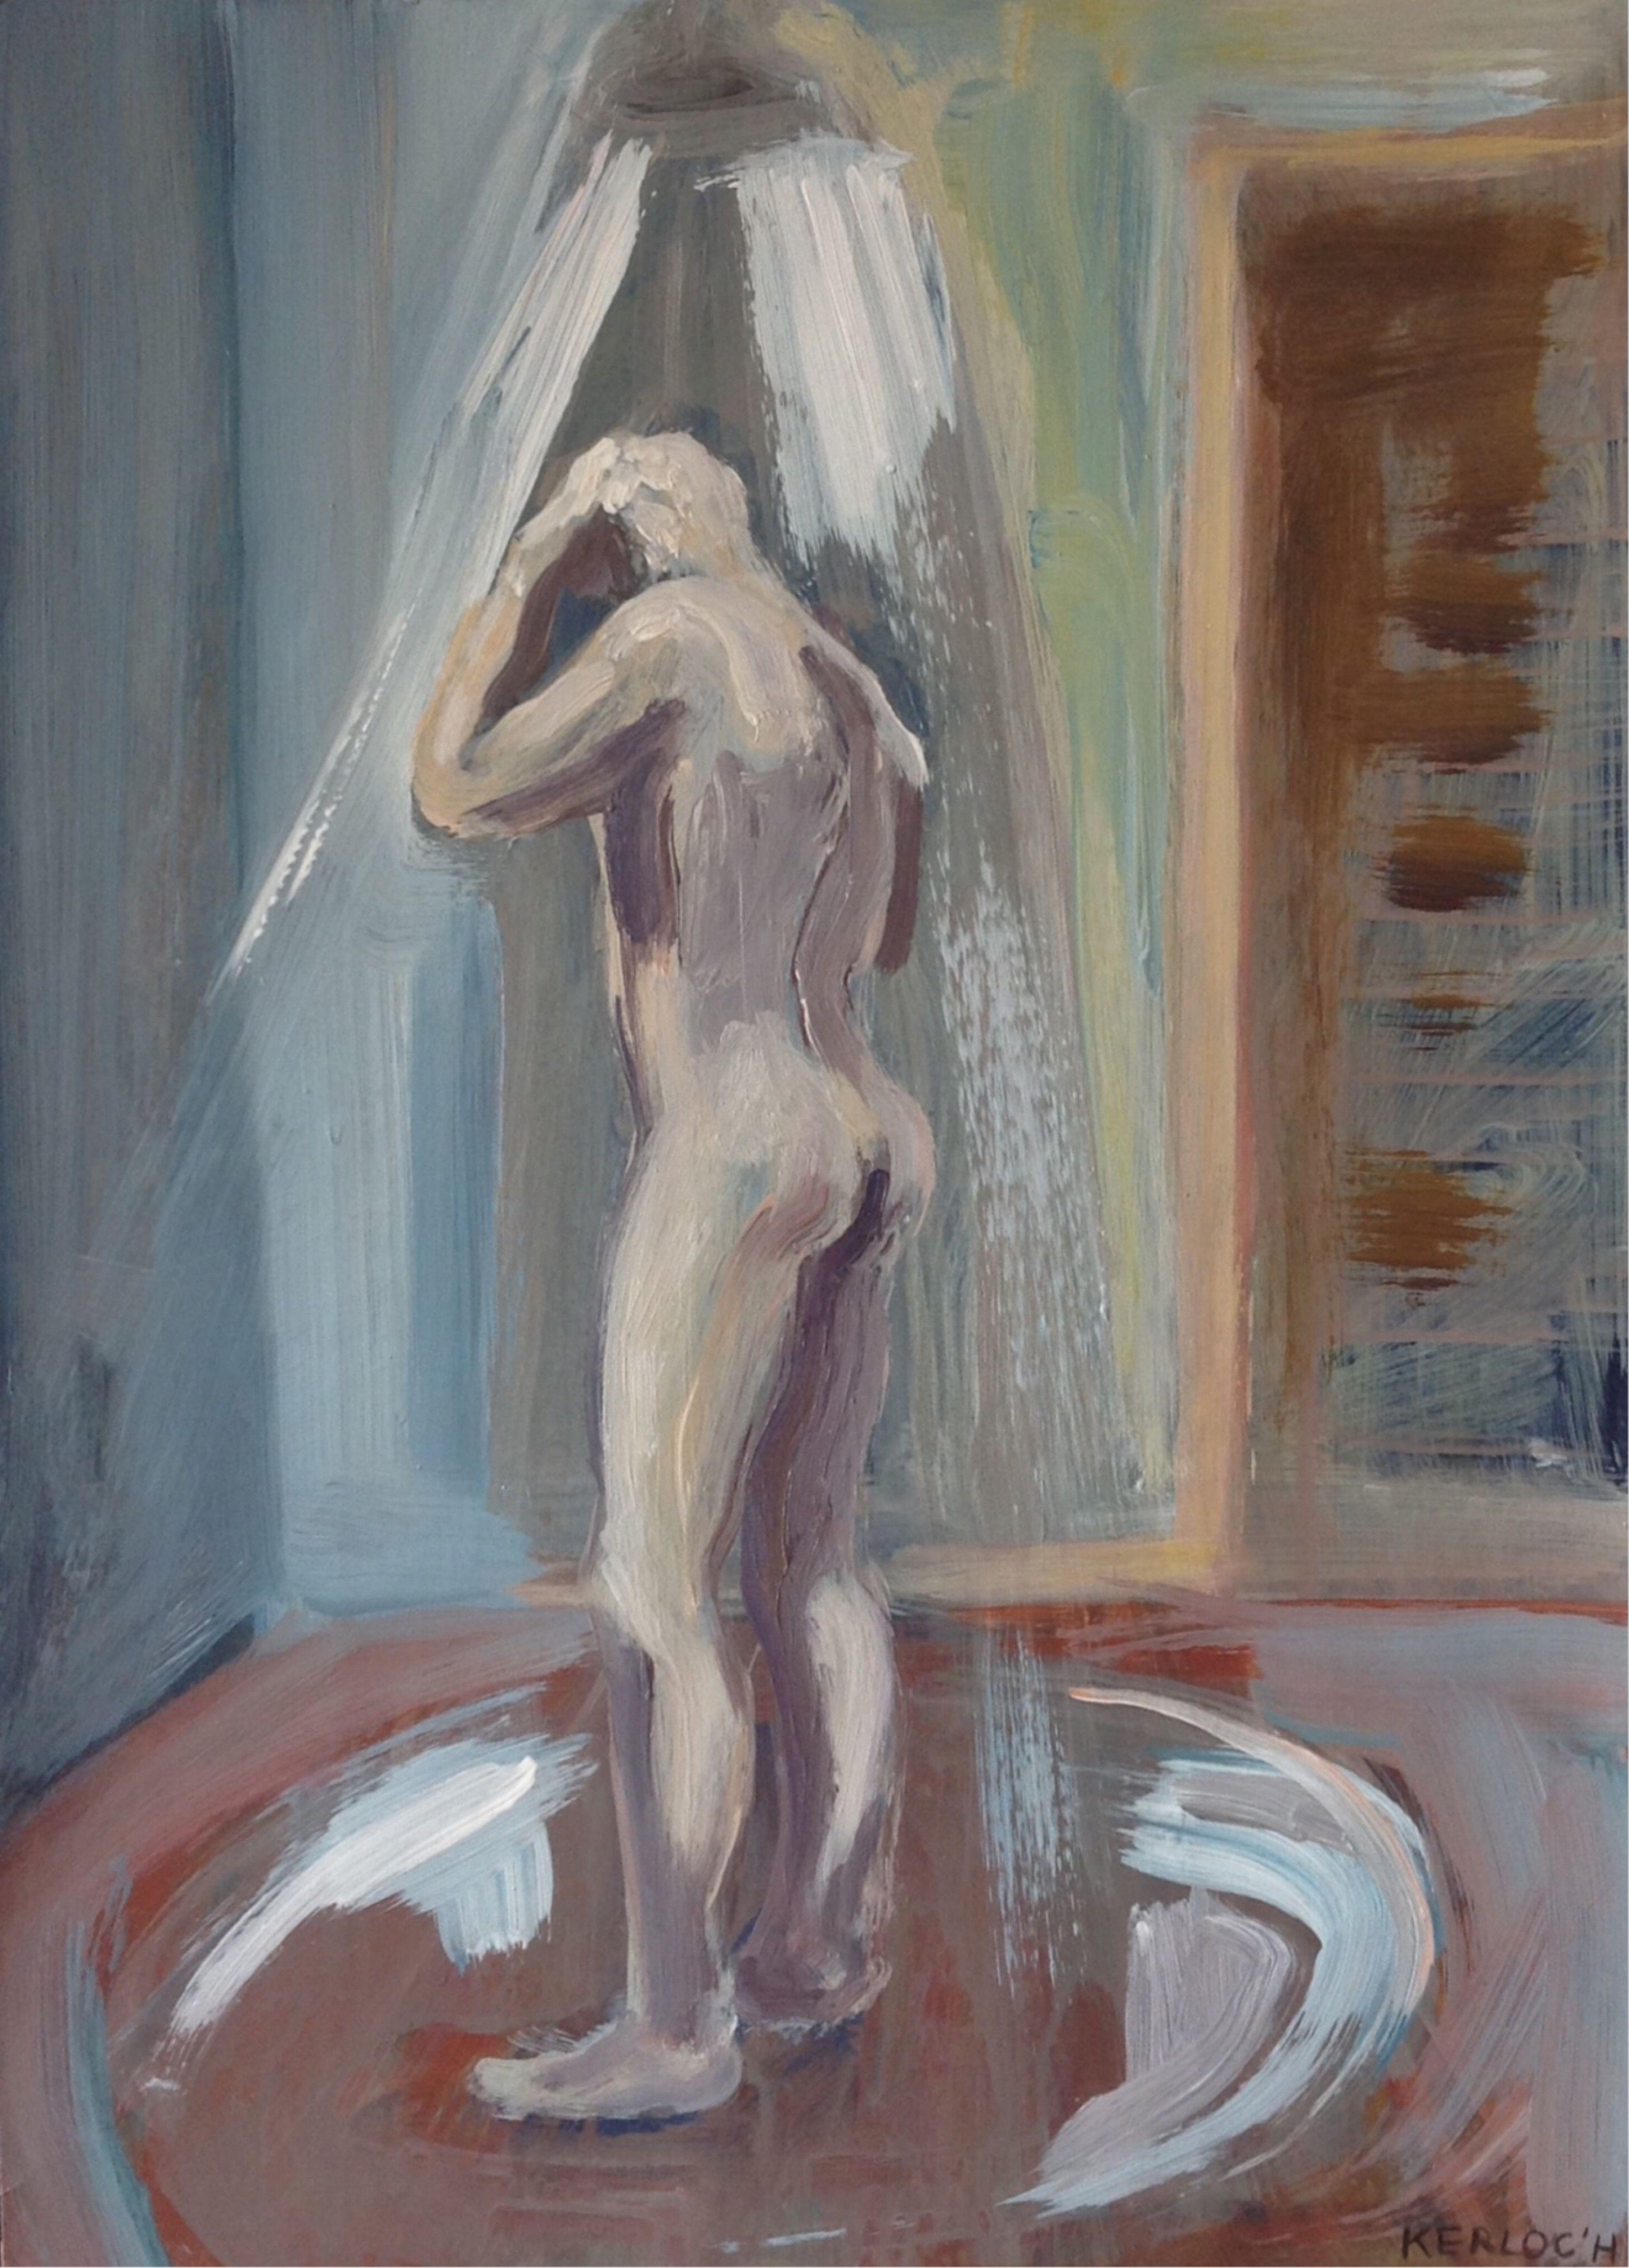 Anyck Alvarez Kerloch Figurative Painting - In The Shower, Painting, Acrylic on Paper